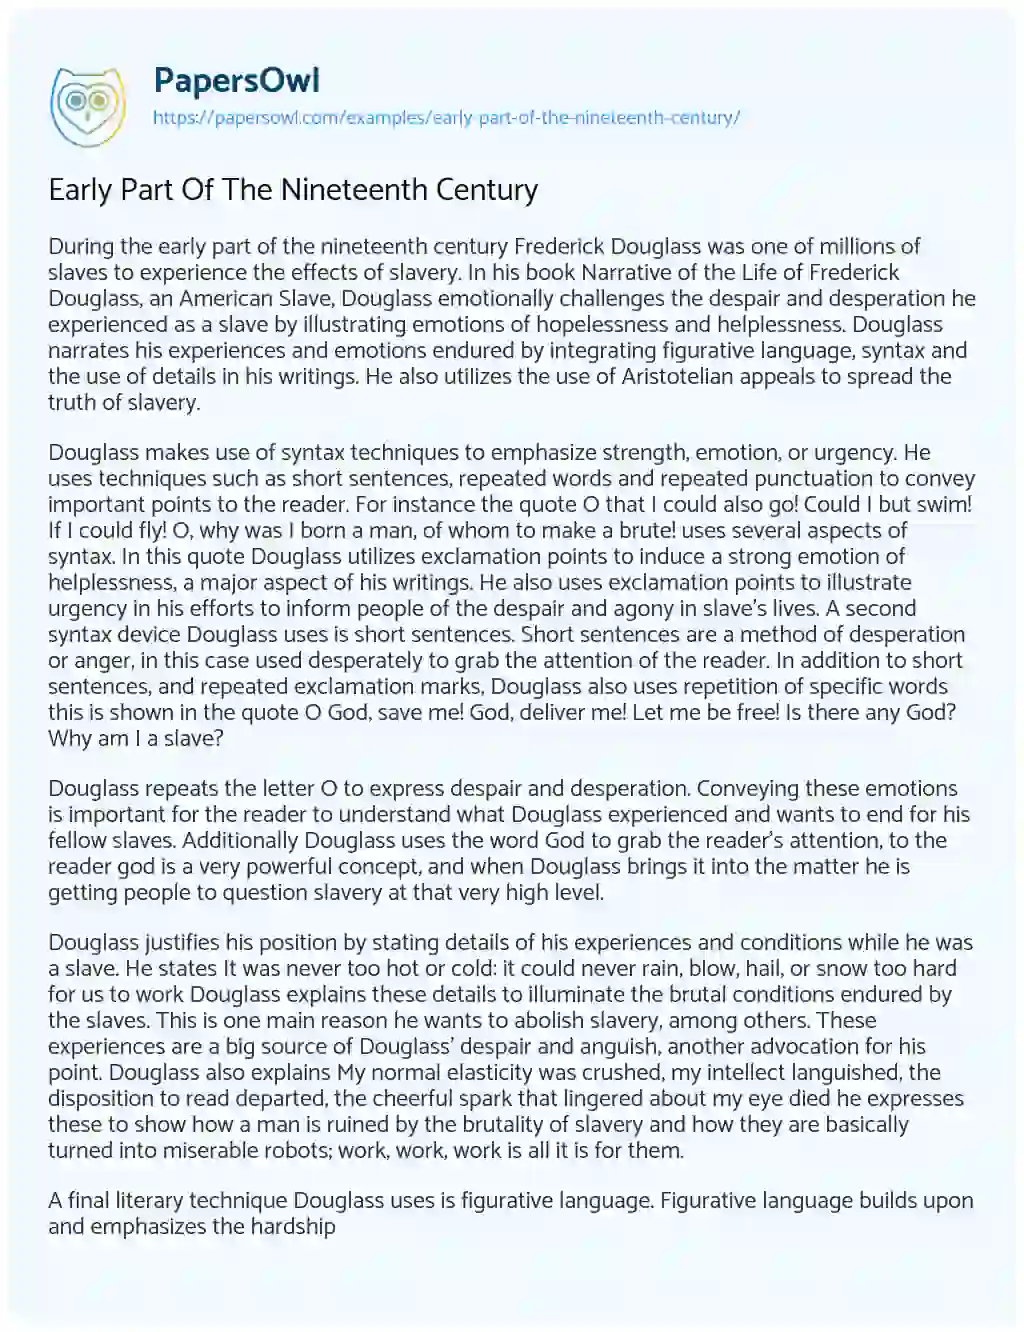 Essay on Early Part of the Nineteenth Century